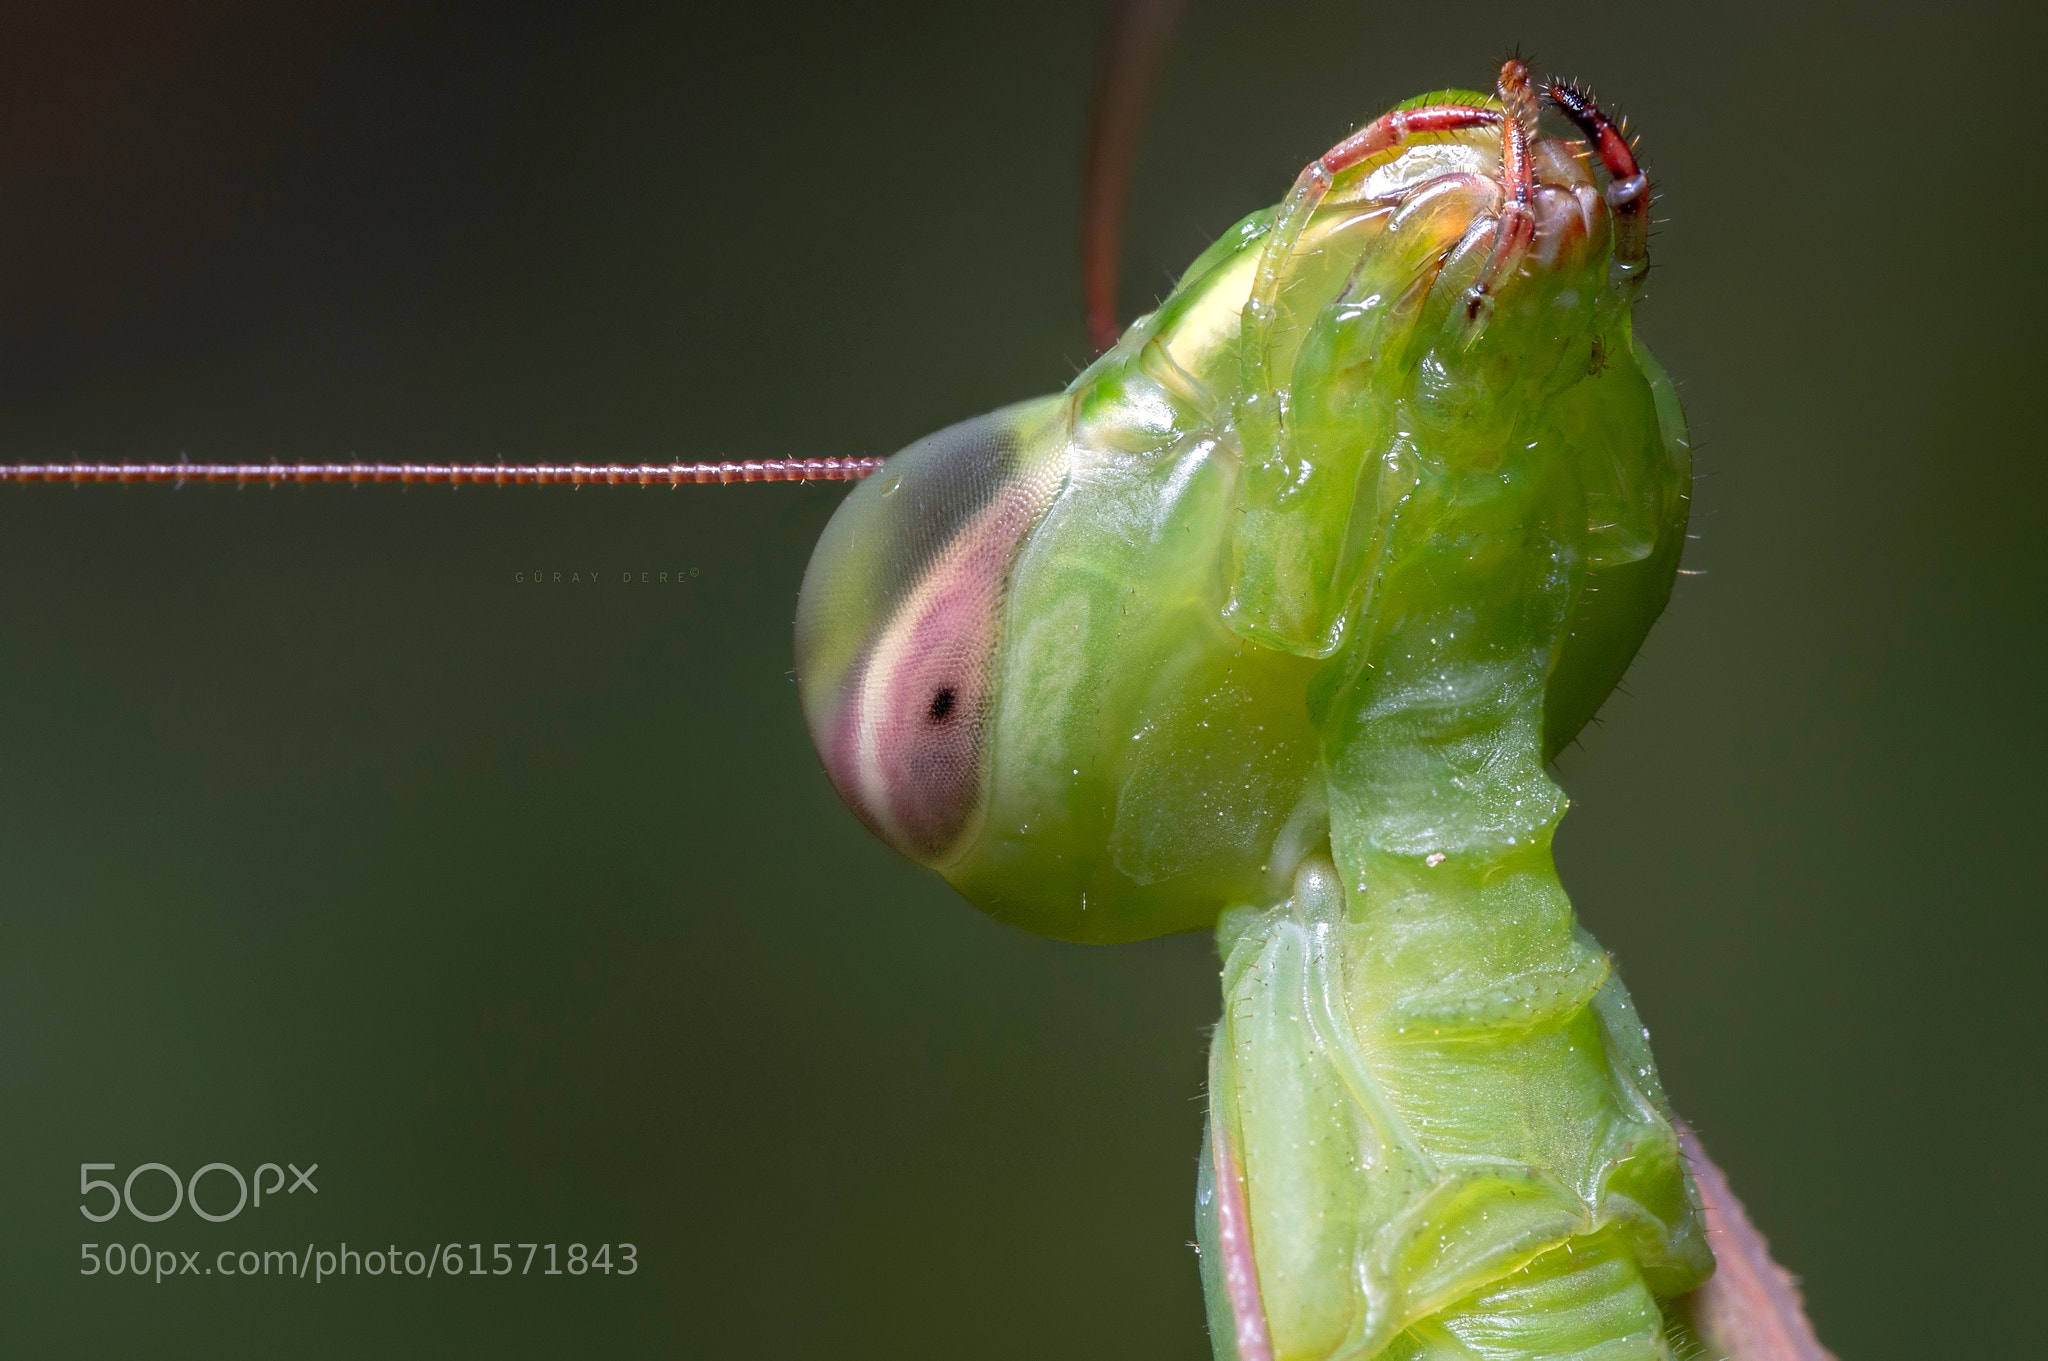 Photograph Mantis by Güray Dere on 500px" data-protect="Güray Dere" class="the_photo" style="max-height: 717px;